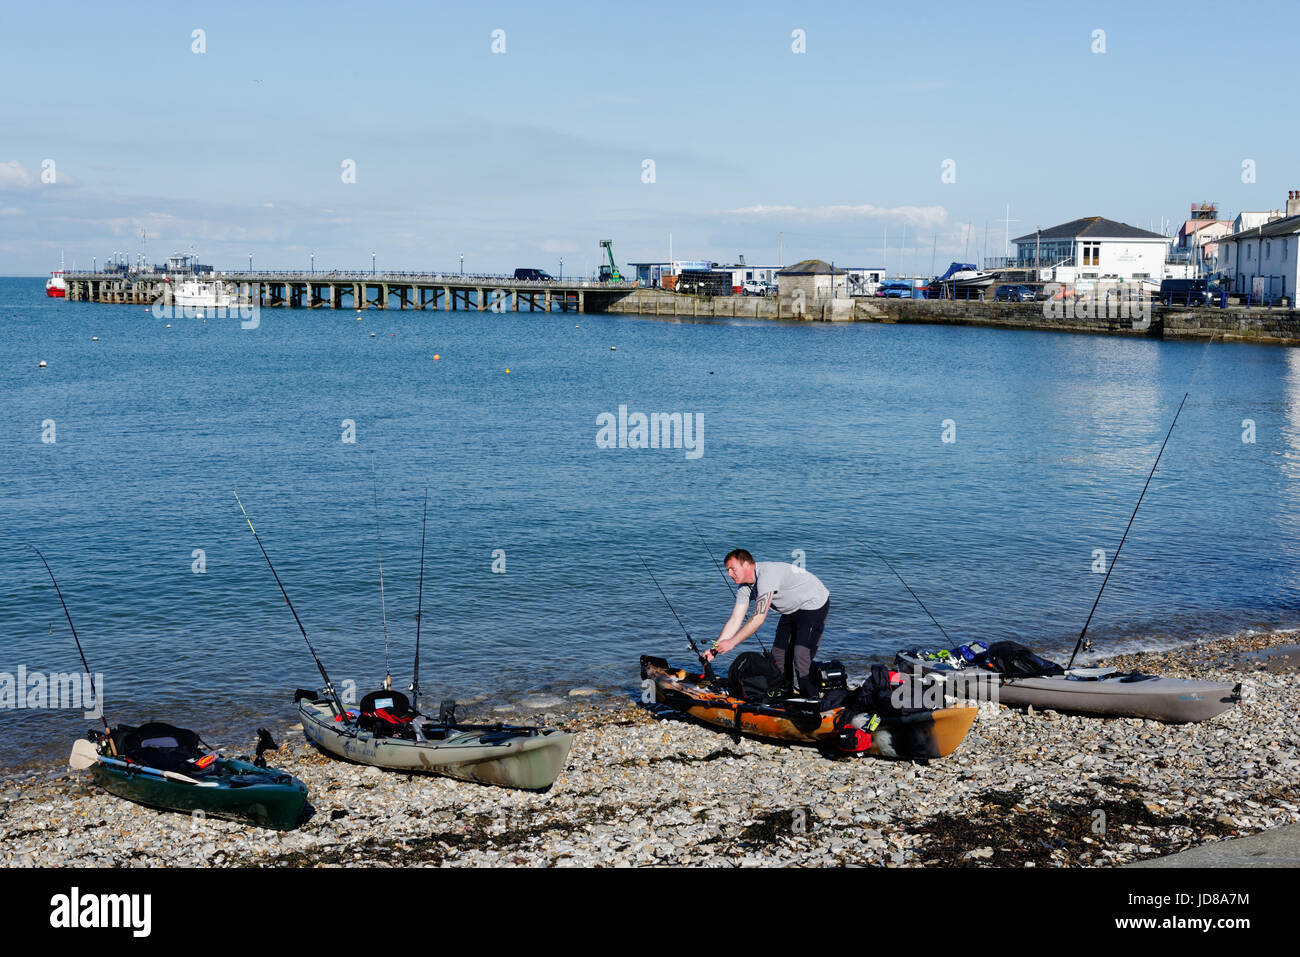 Two fishermen preparing their boats on Swanage Beach, Swanage in Dorset, England Stock Photo